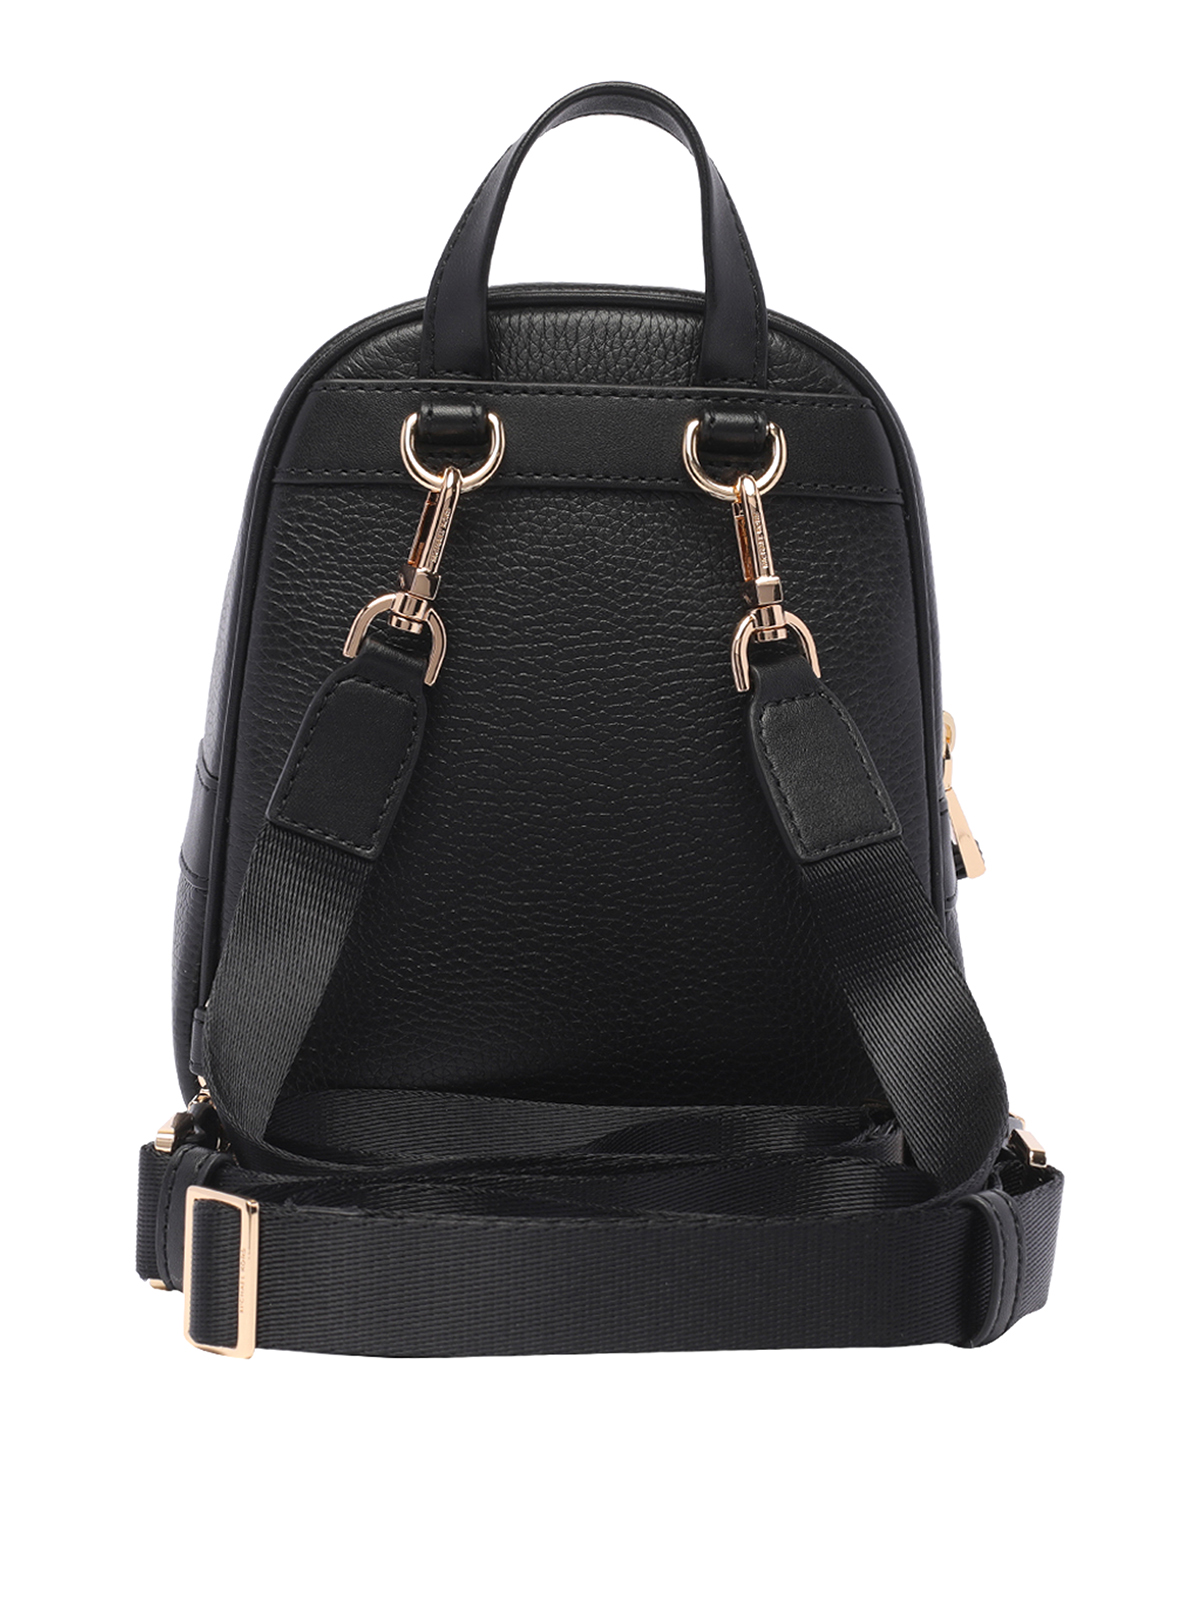 MICHAEL KORS Maisie Extra-Small Pebbled Leather 2-In-1 Backpack - Olive